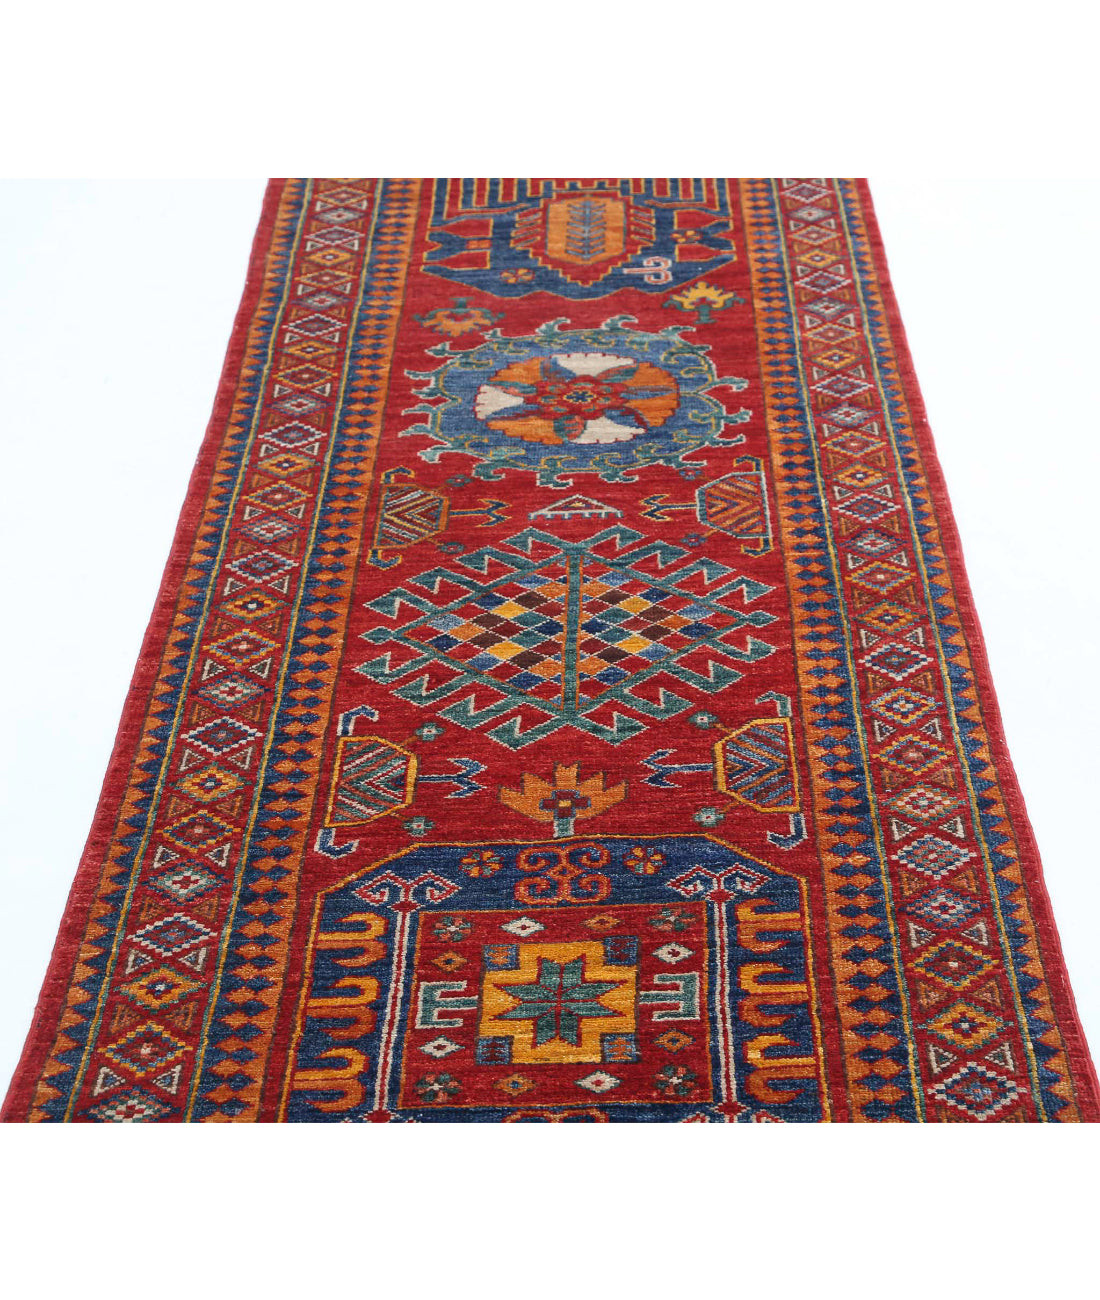 Hand Knotted Nomadic Caucasian Humna Wool Rug - 2'8'' x 7'10'' 2'8'' x 7'10'' (80 X 235) / Red / Gold